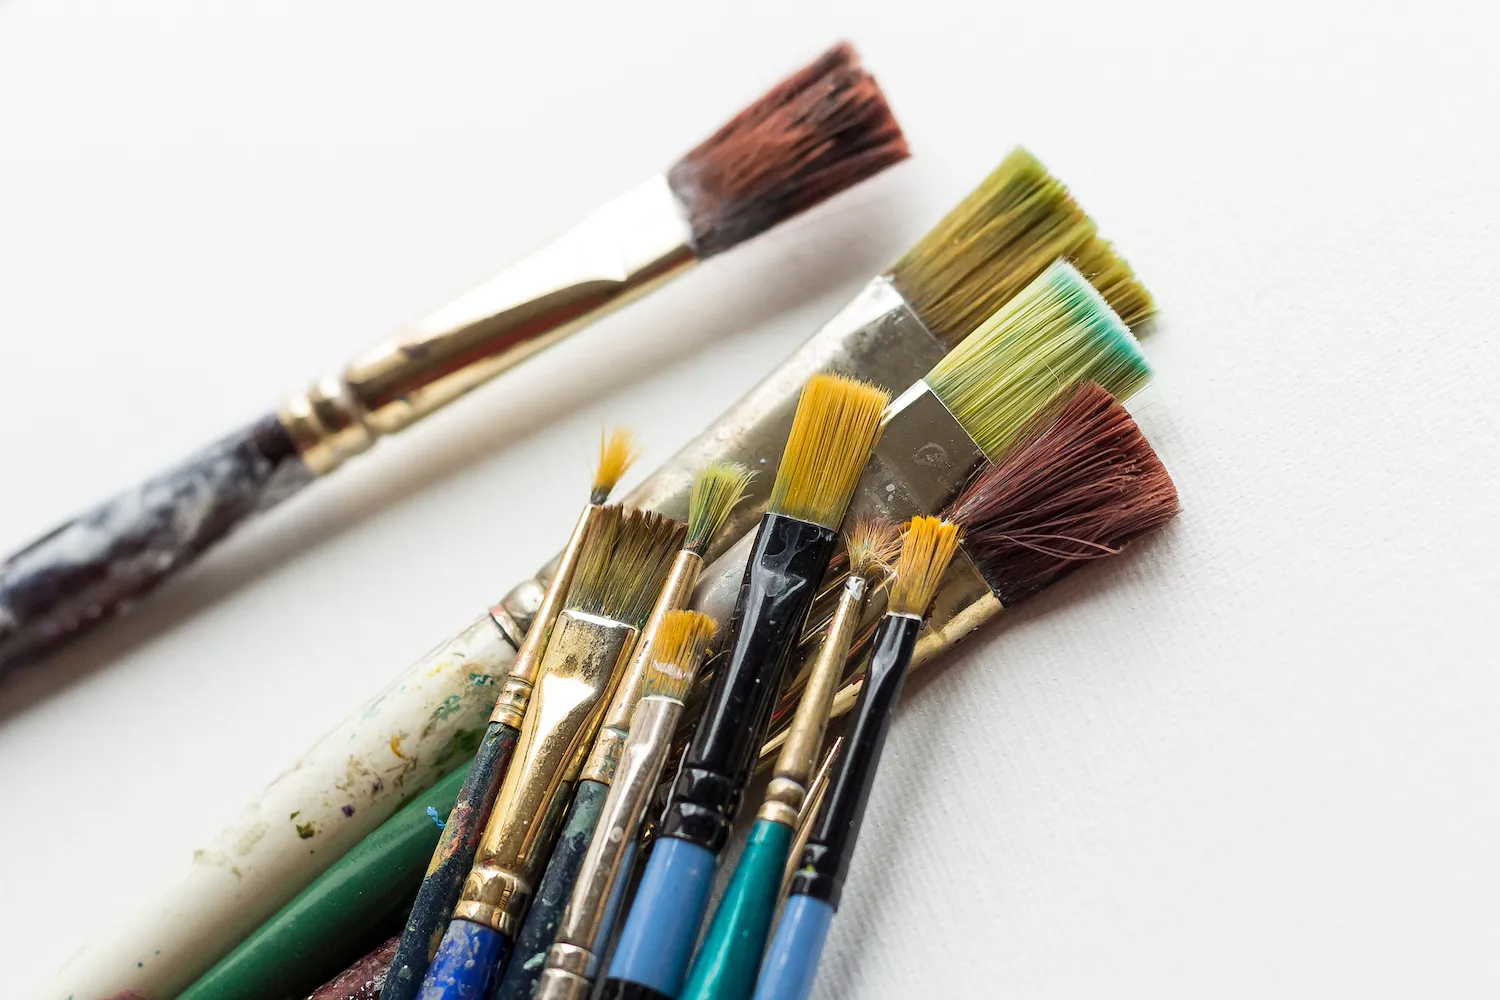 Parts of a Paintbrush - Everything You Need to Know